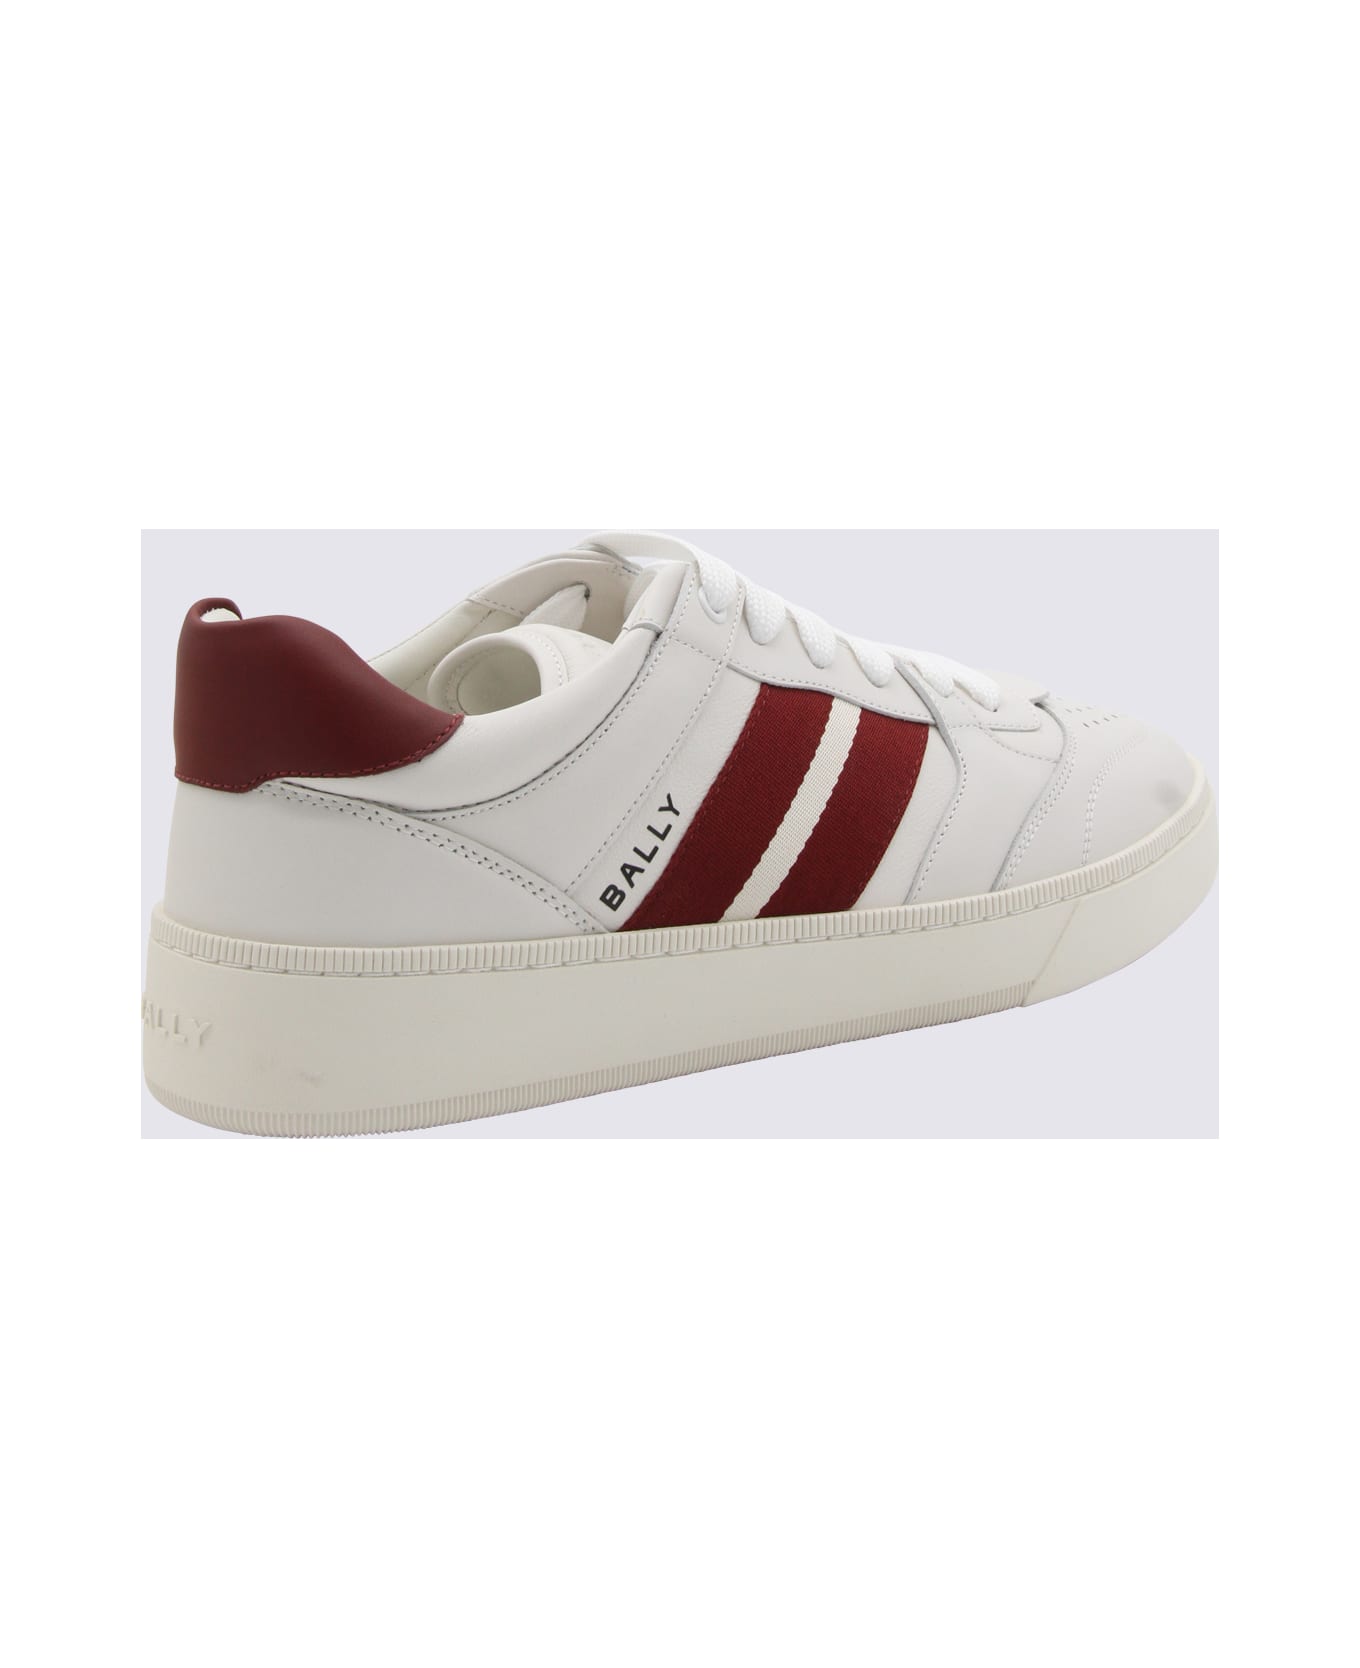 Bally White And Red Leather Sneakers - WHITE/BALLYRED スニーカー